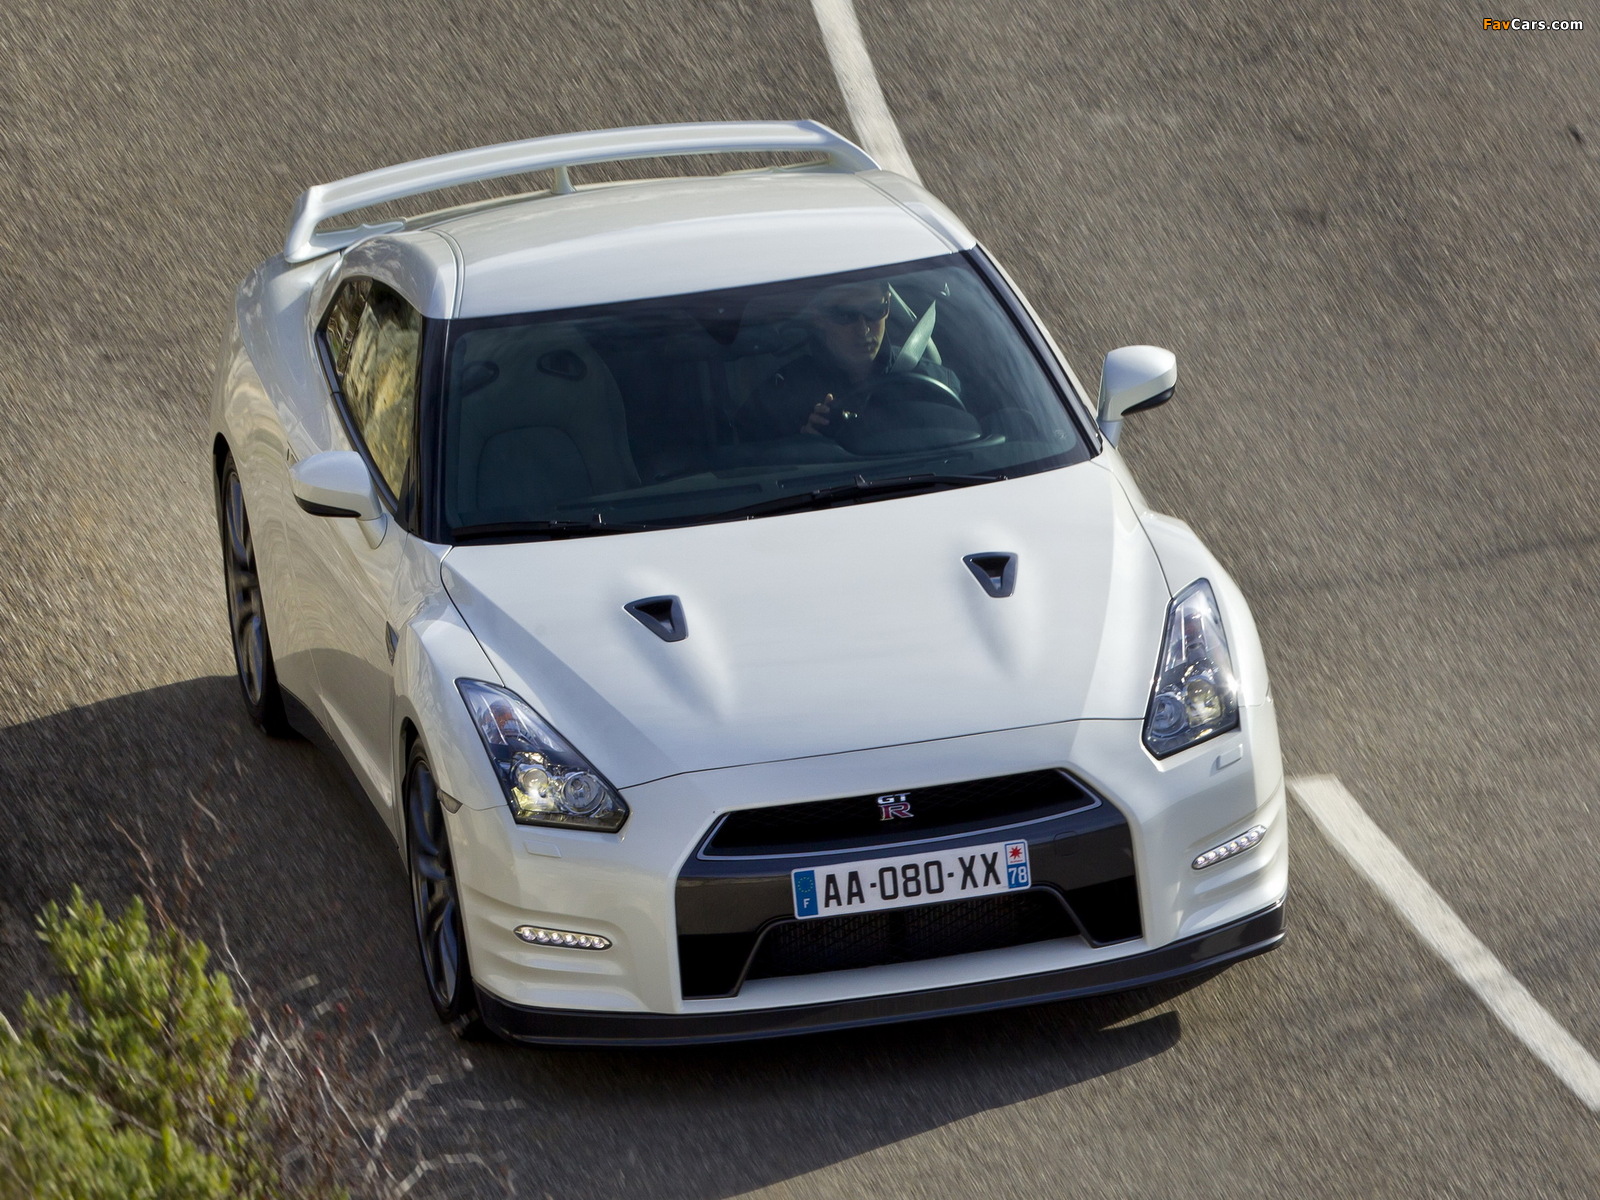 Nissan GT-R Black Edition (R35) 2010 wallpapers (1600 x 1200)